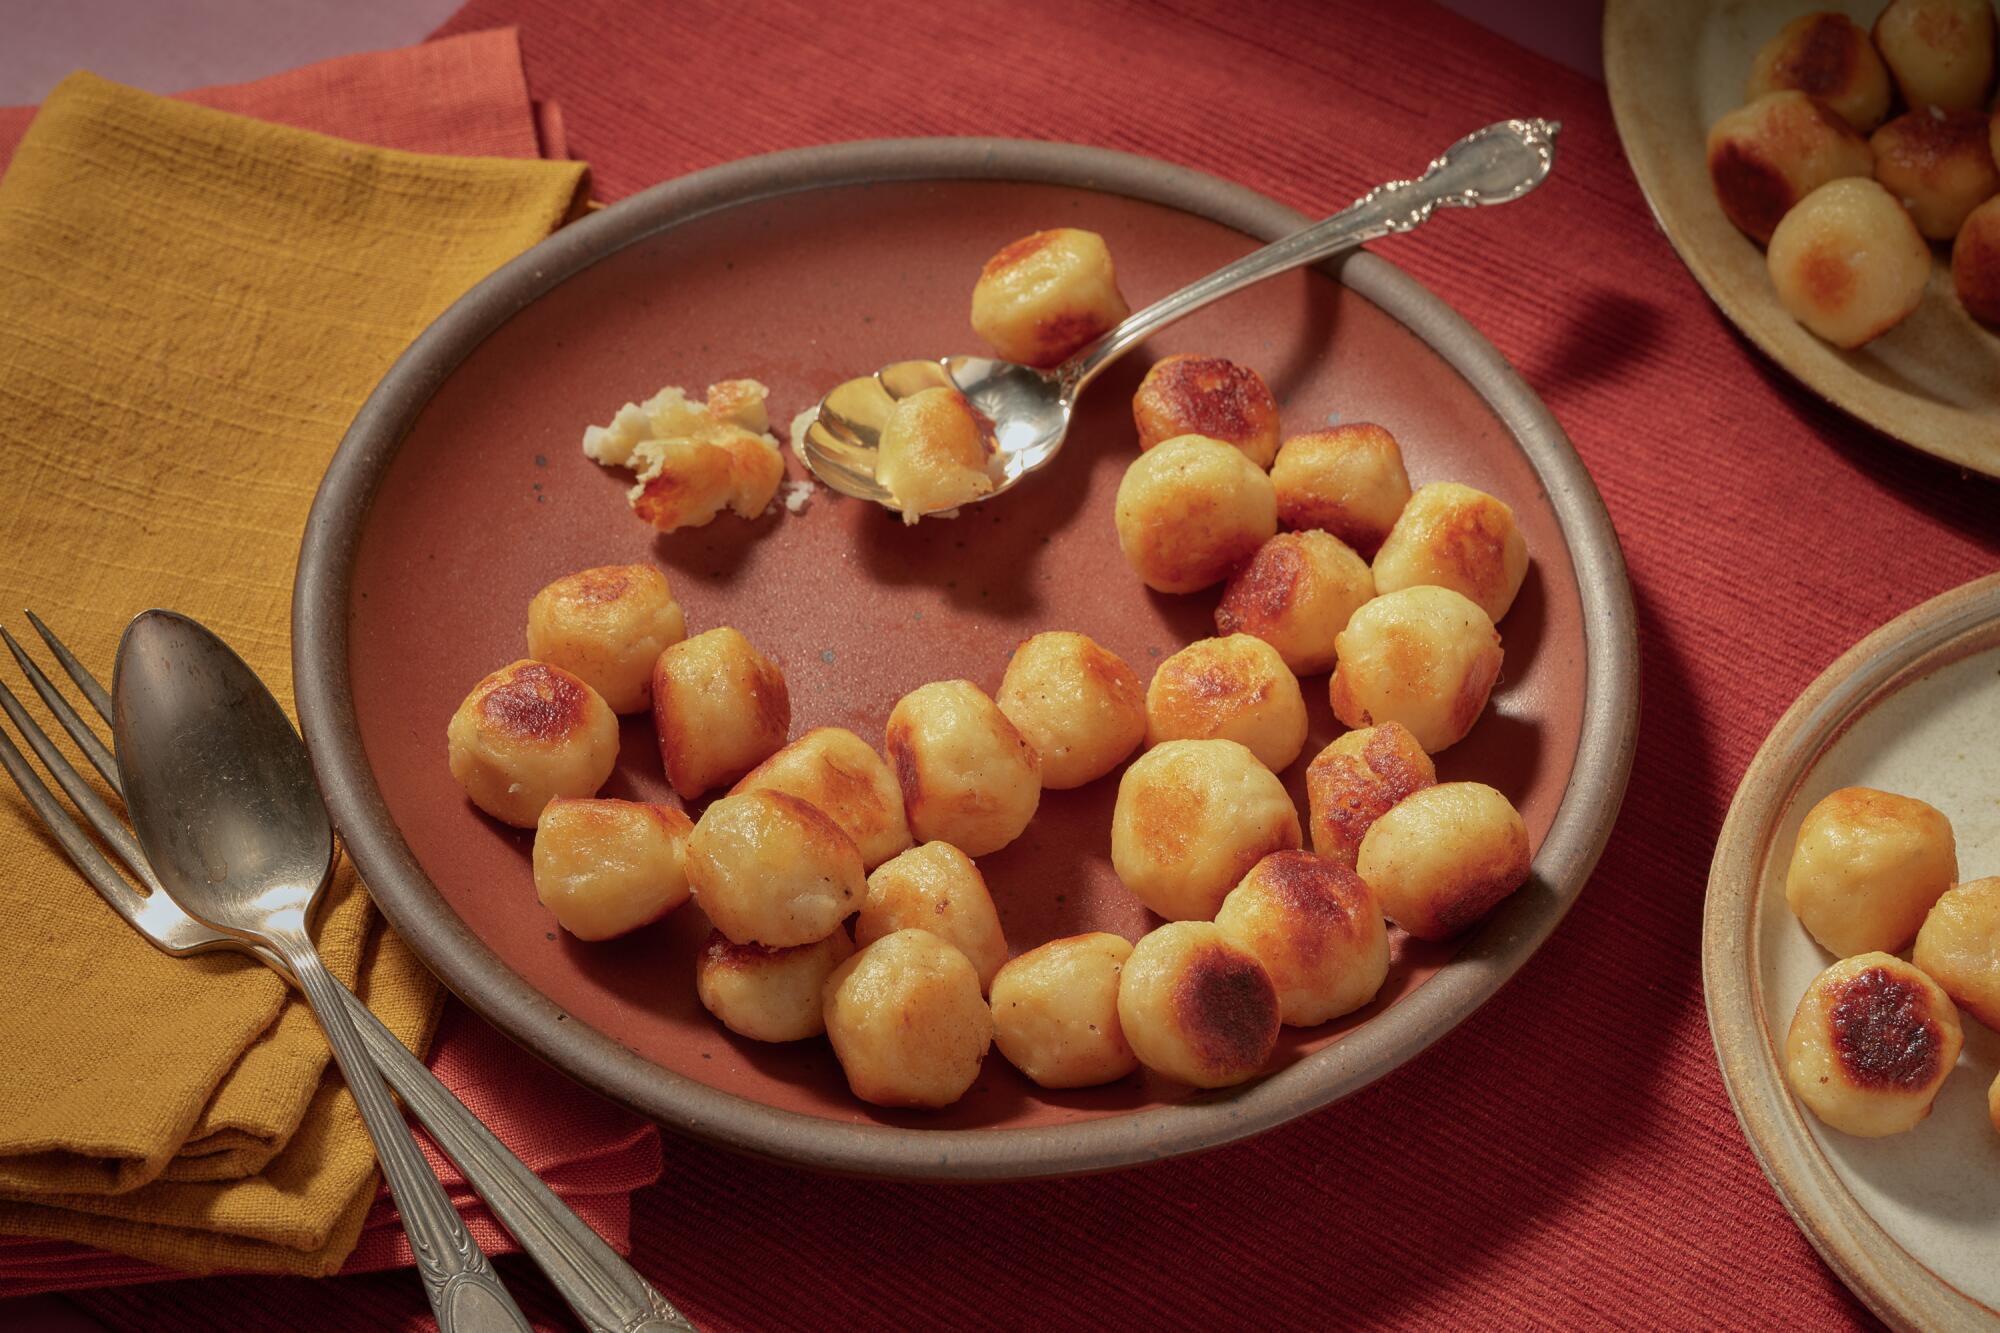 Why do we always fight about the potato balls? We’ll be making them again this Christmas.